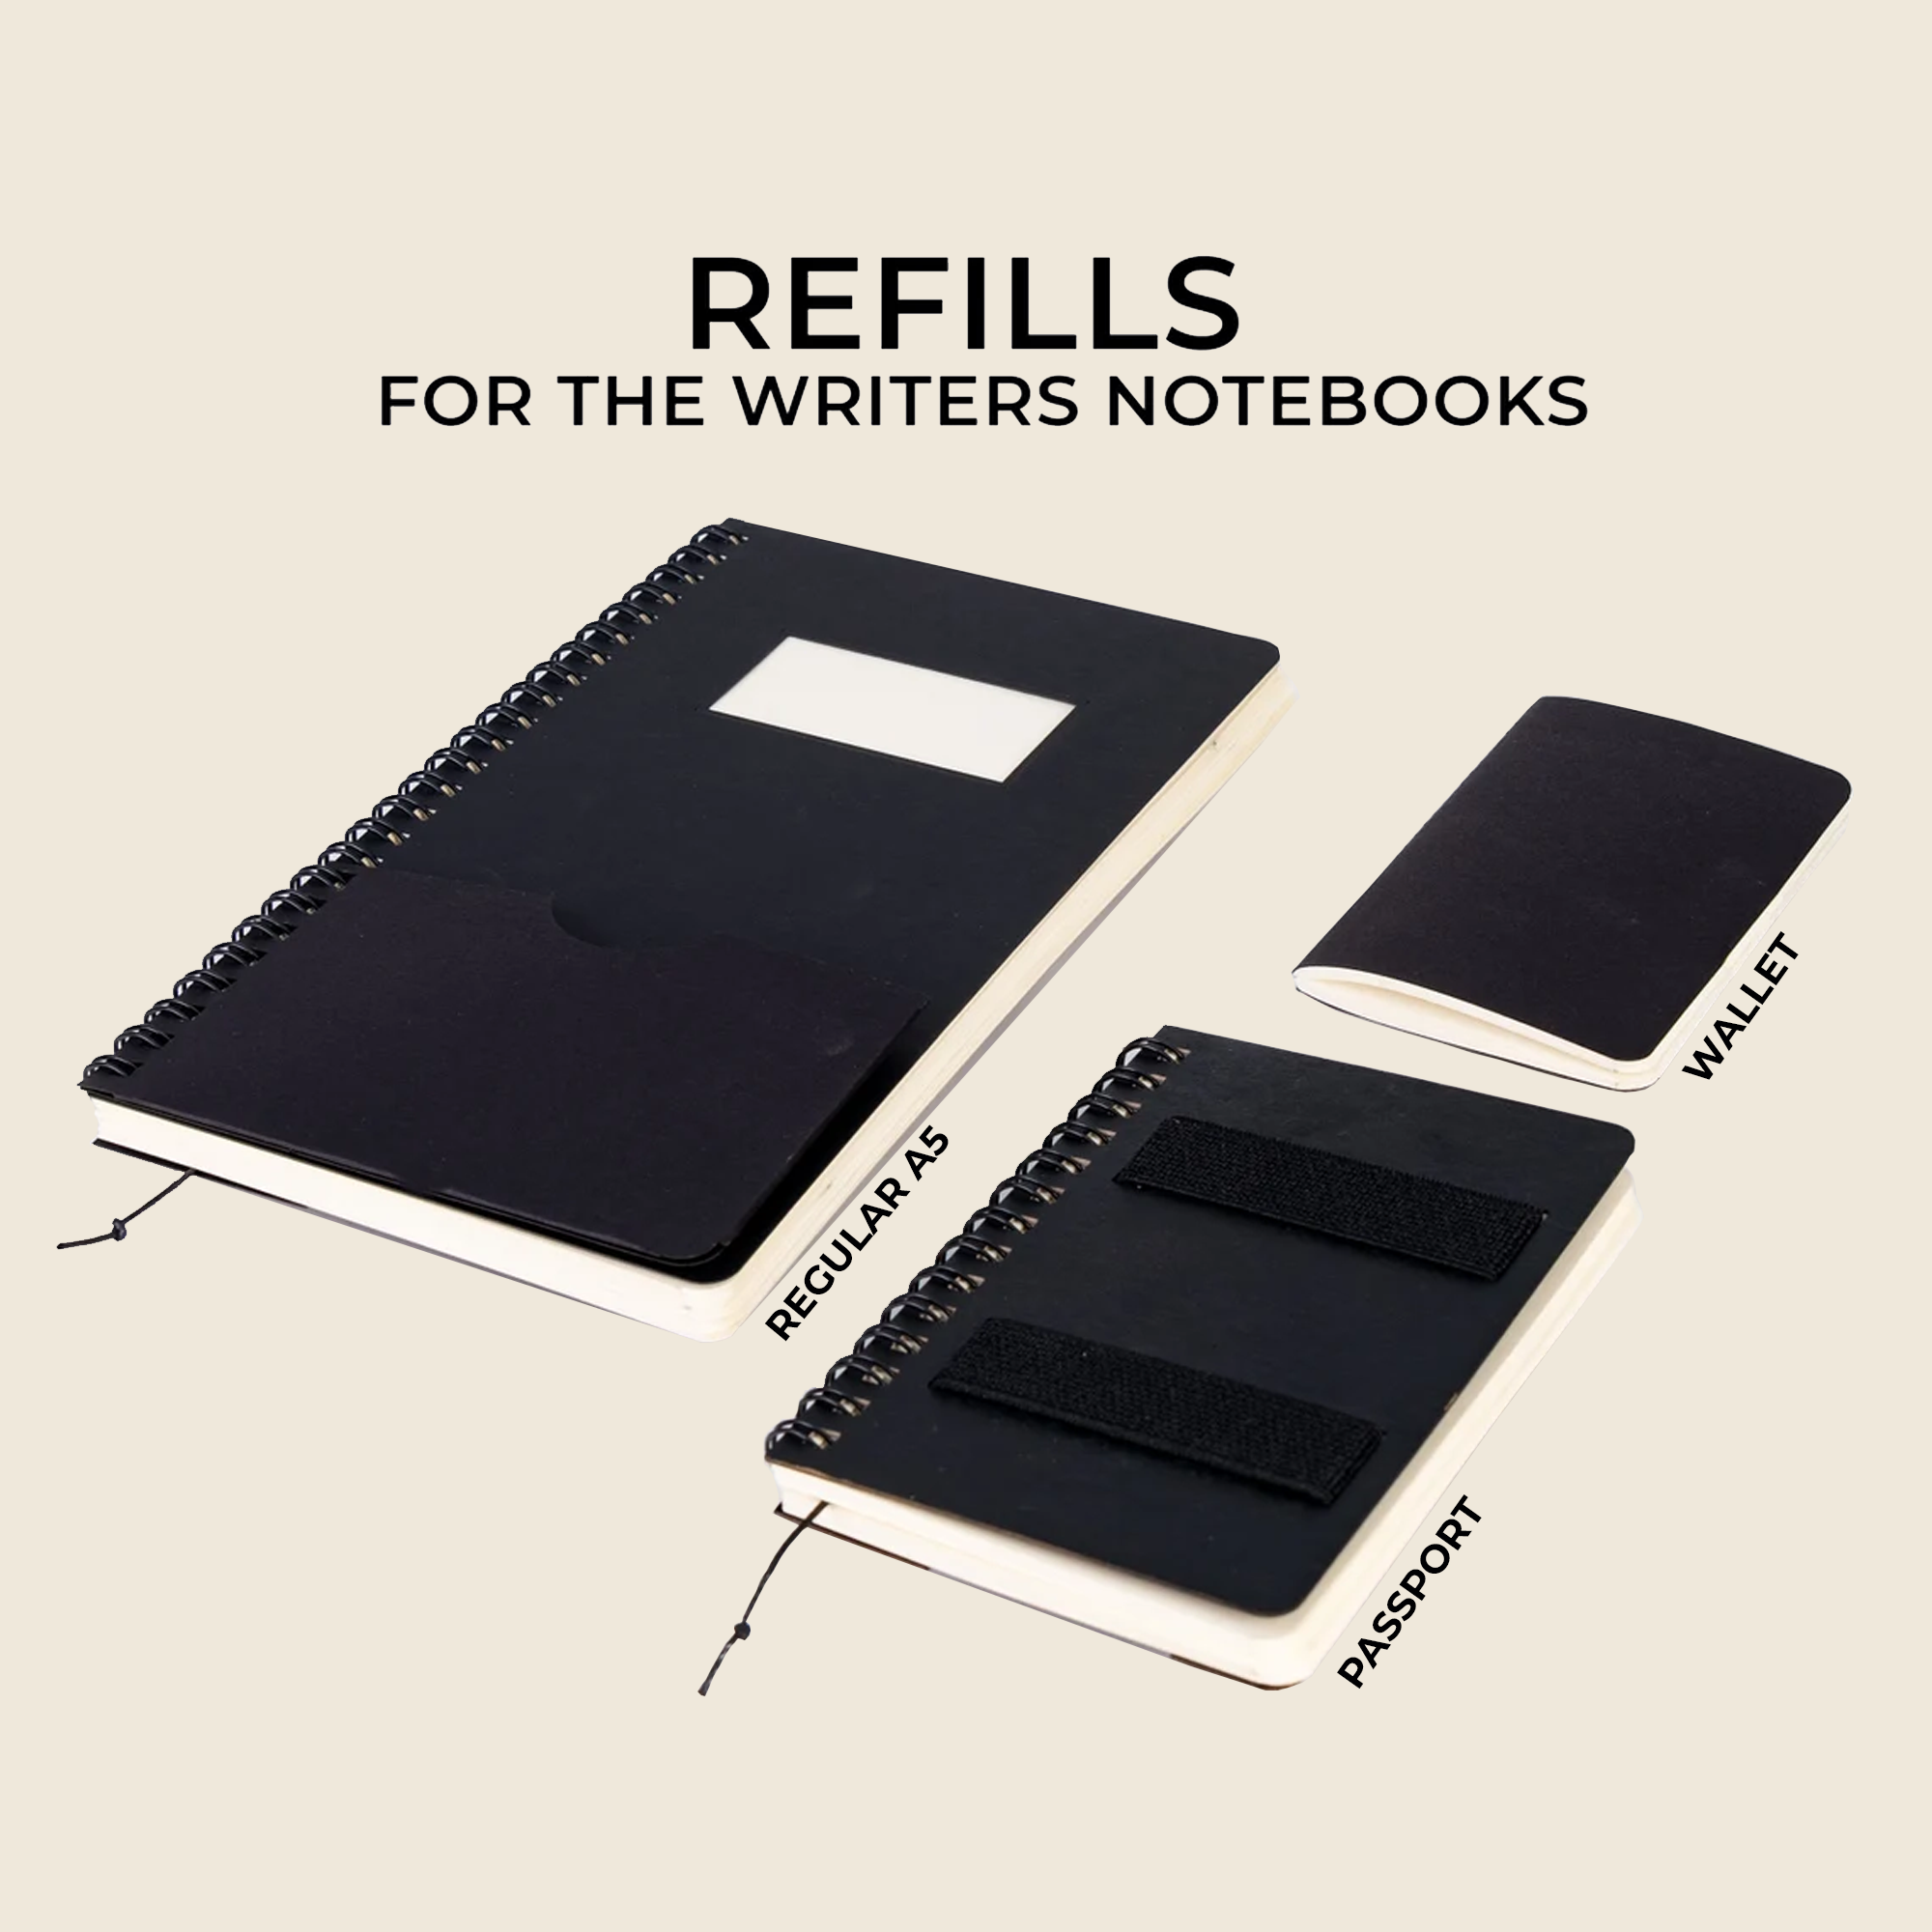 Refills for Writers Notebooks